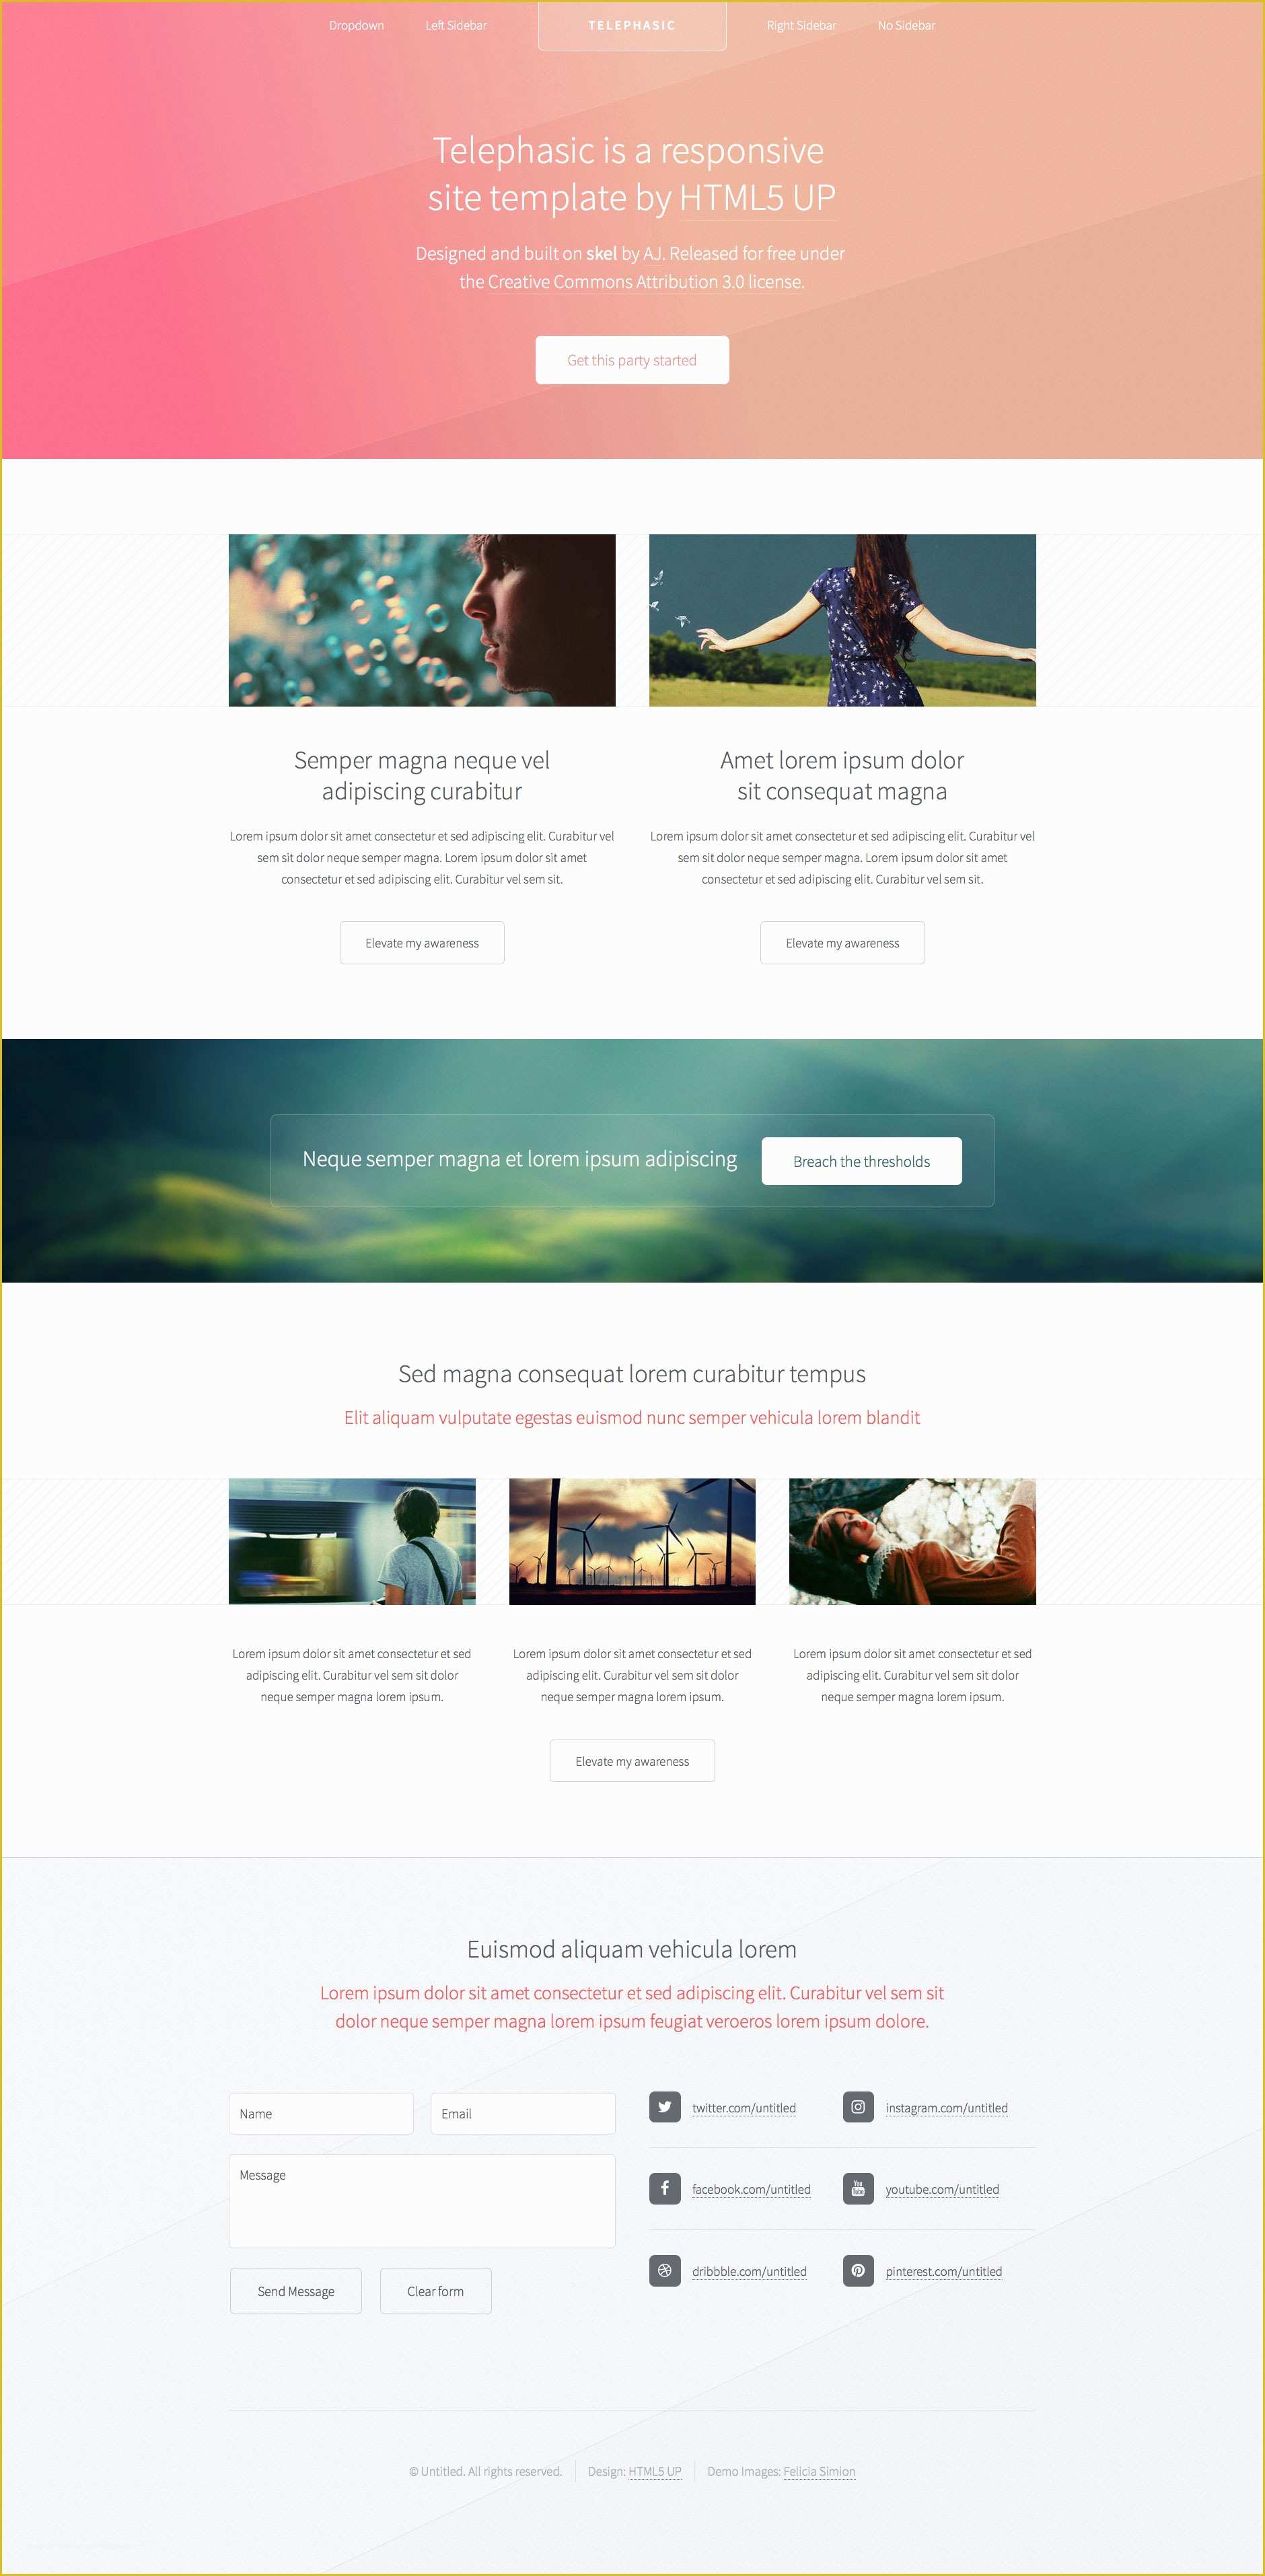 Free HTML5 Responsive Templates Of Telephasic Free Responsive HTML5 Template HTMLtemplates Co